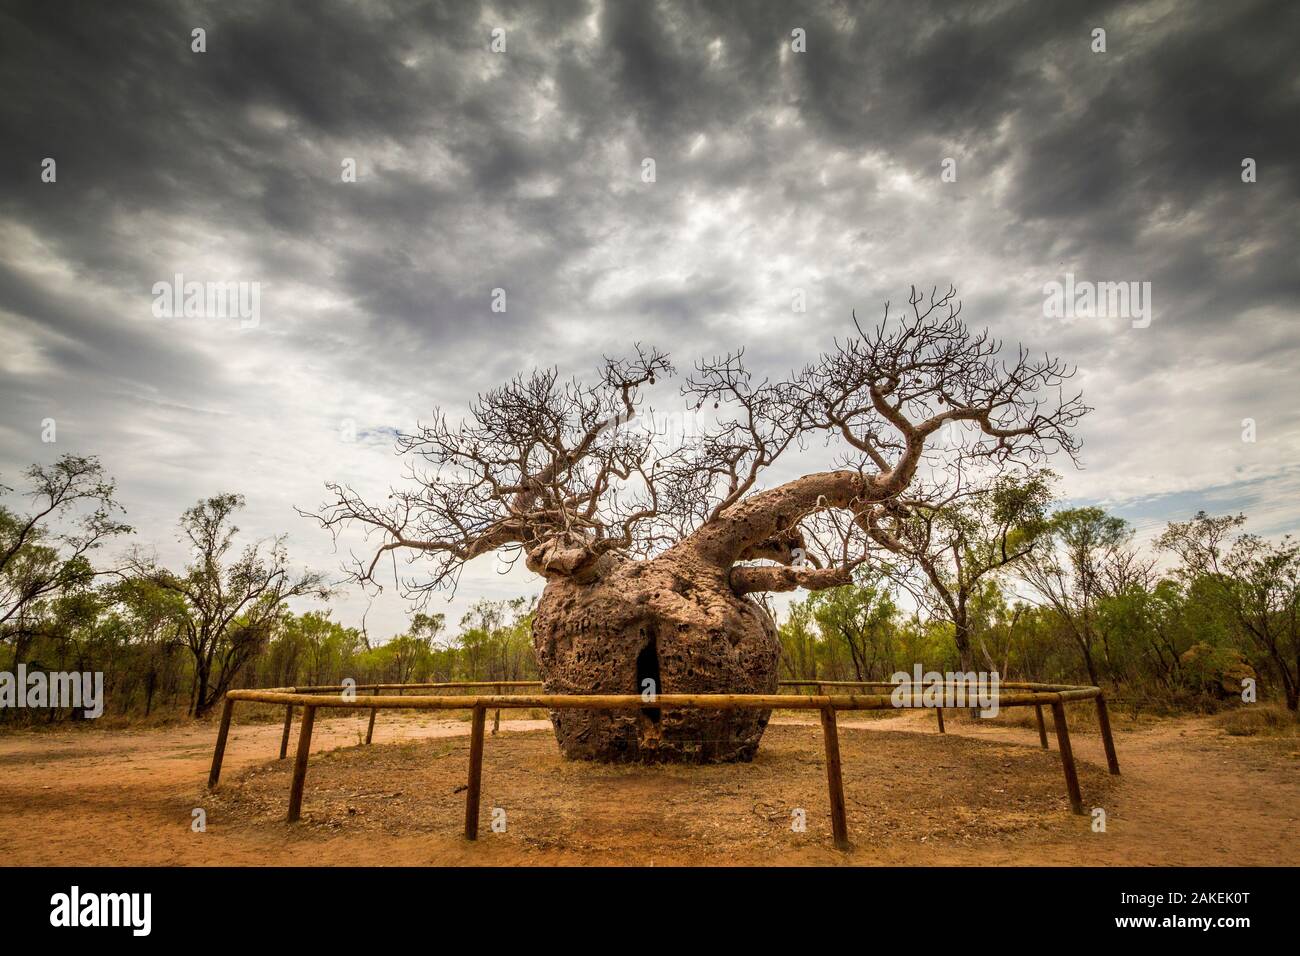 Boab or Australian Baobab tree (Adansonia gregorii) the 'prison tree' used as a prison for aboriginal people on their way to sentencing, 1800s.  Derby, Western Australia. Stock Photo